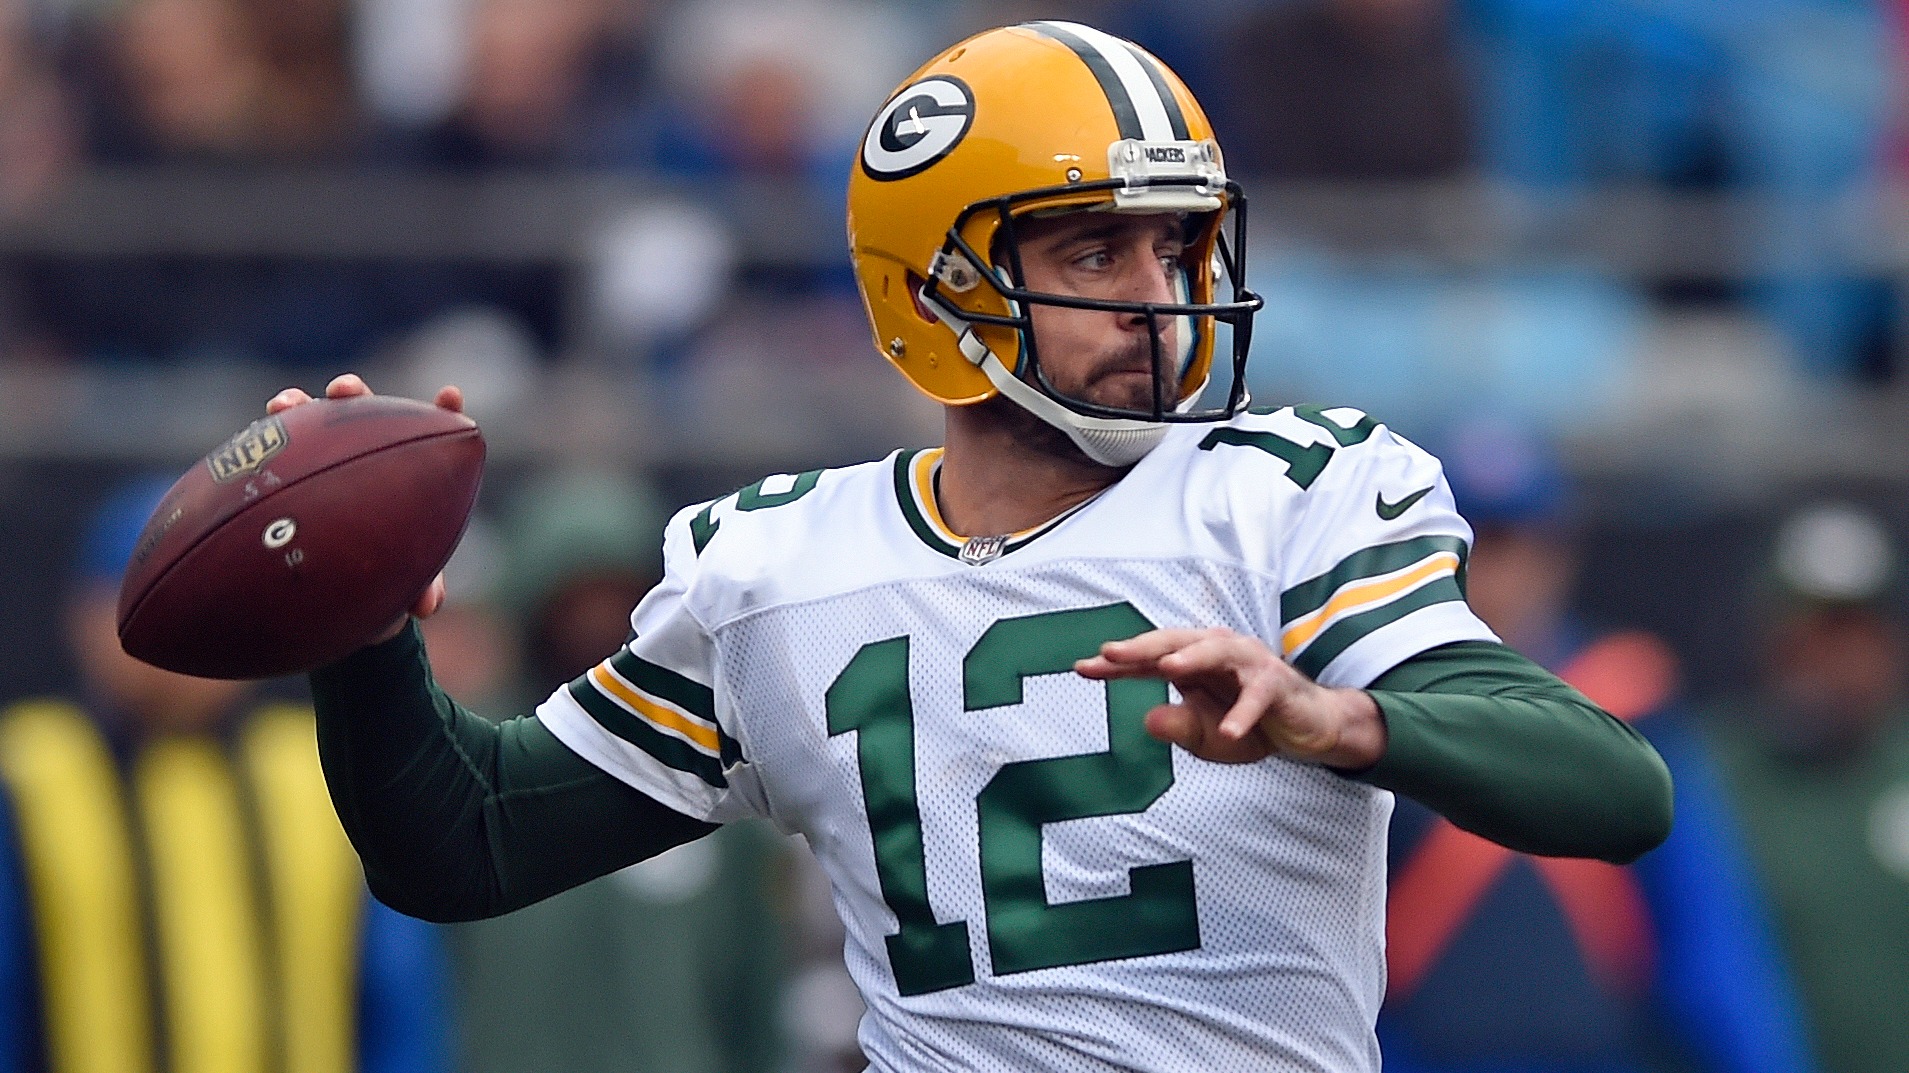 The Quarterbacks Who Move Nfl Betting Lines The Most